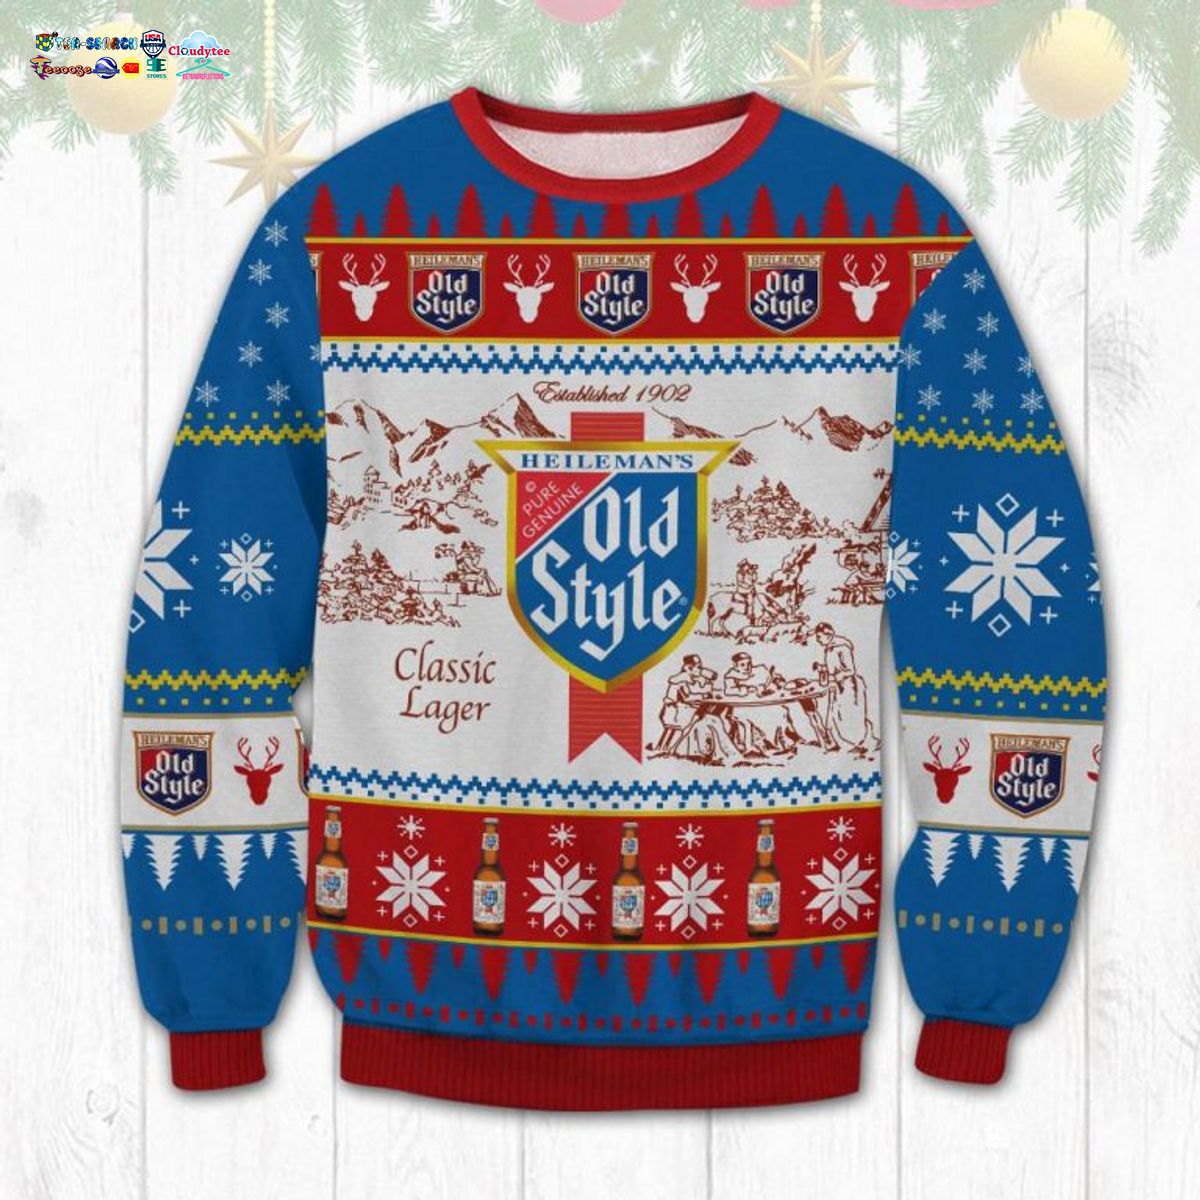 old-style-ugly-christmas-sweater-1-Pc3Bq.jpg